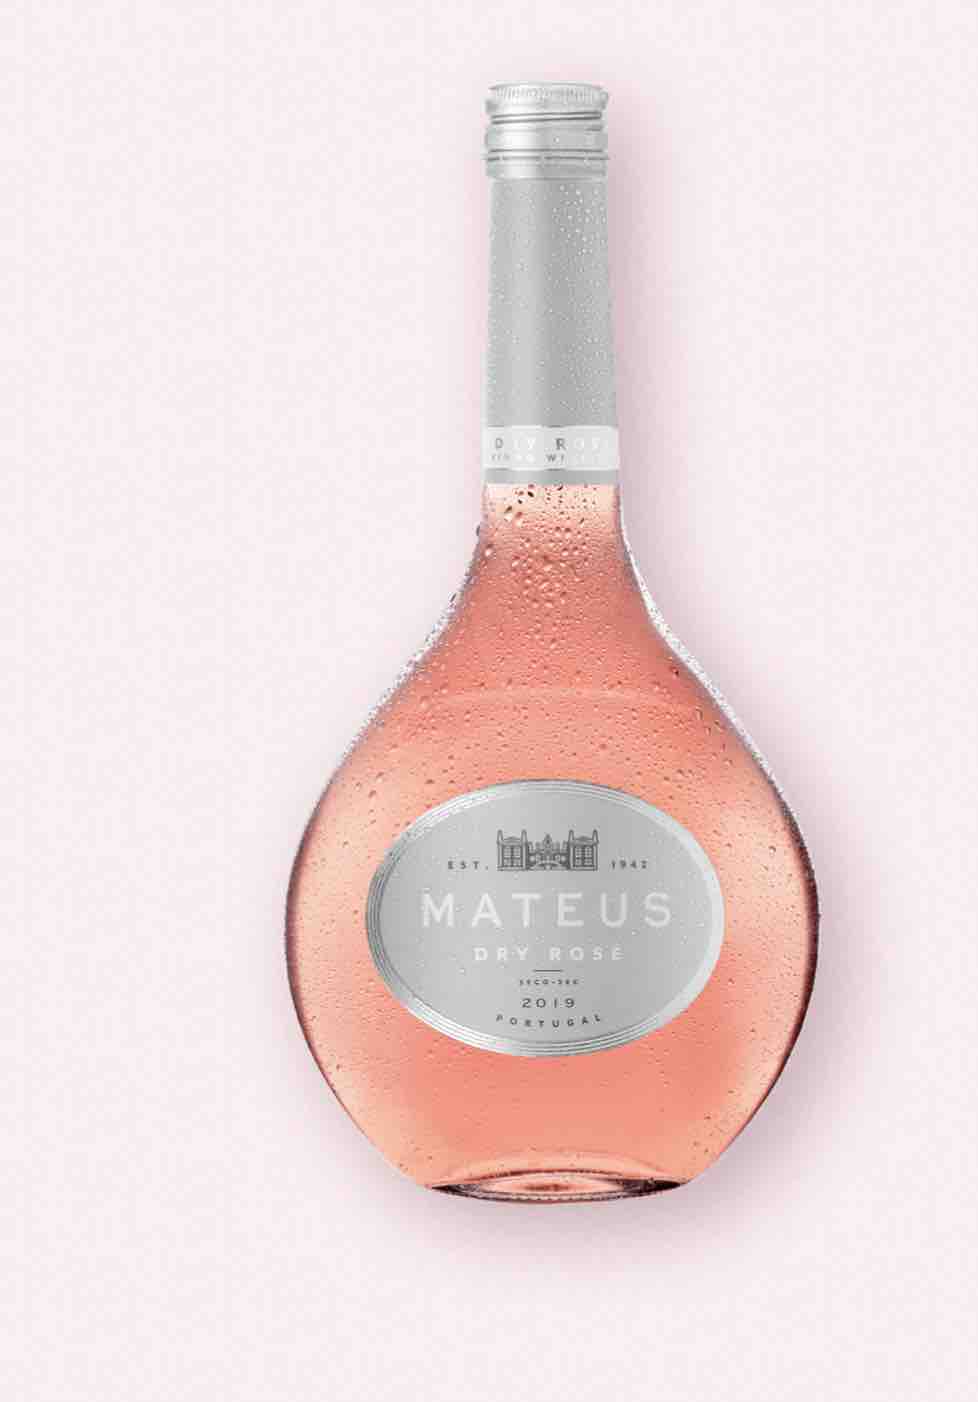 These Are The Best Rosé Wine Bottles To Experience Summer’s Most Popular Drink